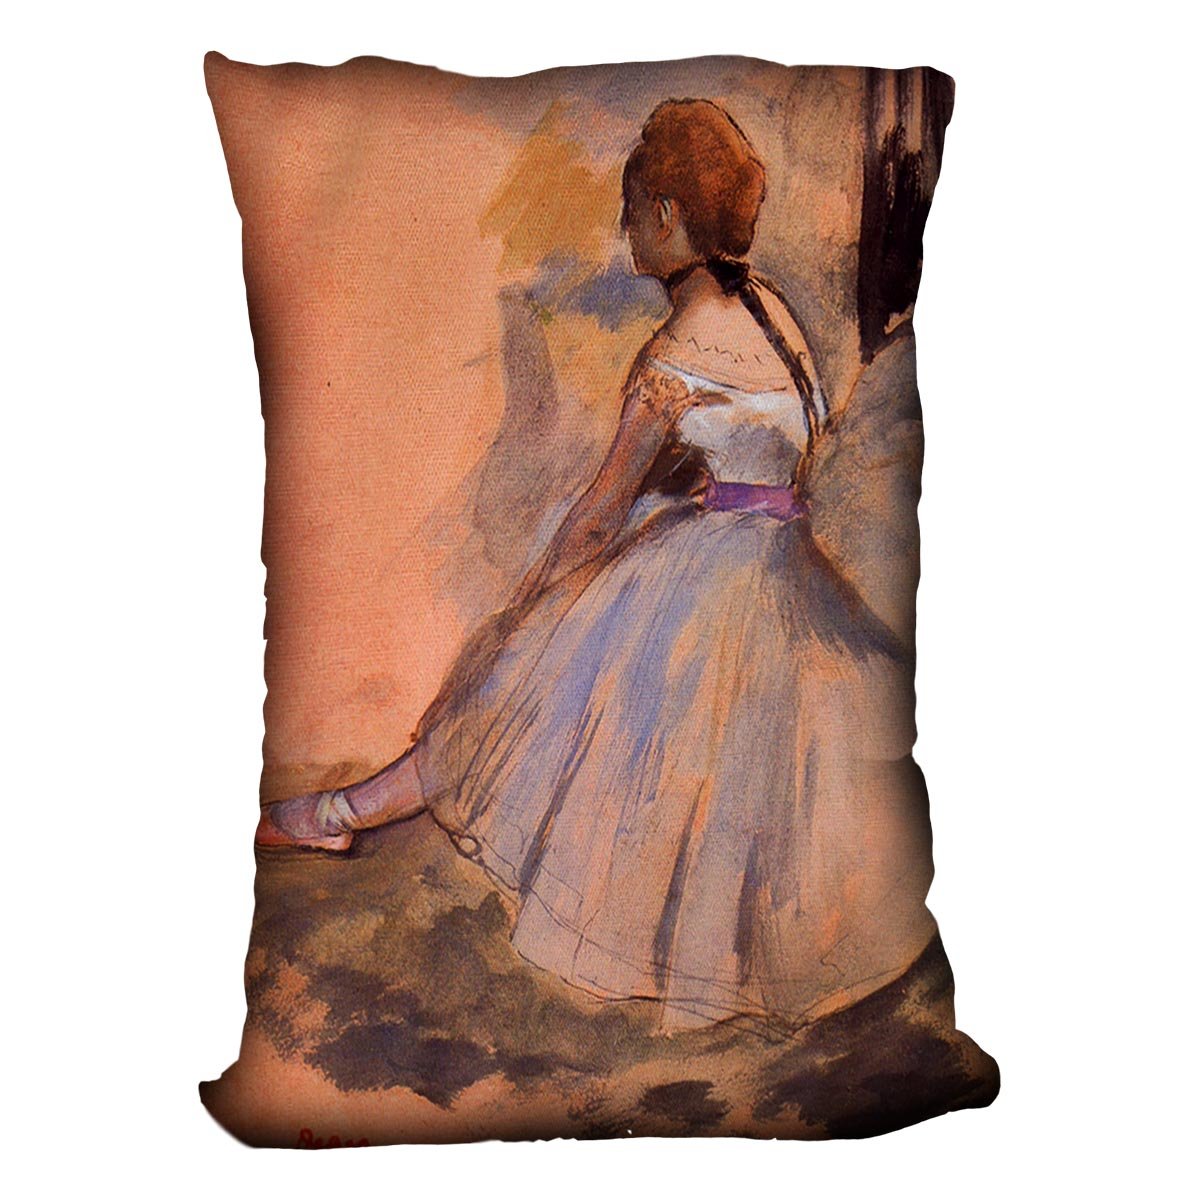 Sitting dancer with extended left leg by Degas Cushion